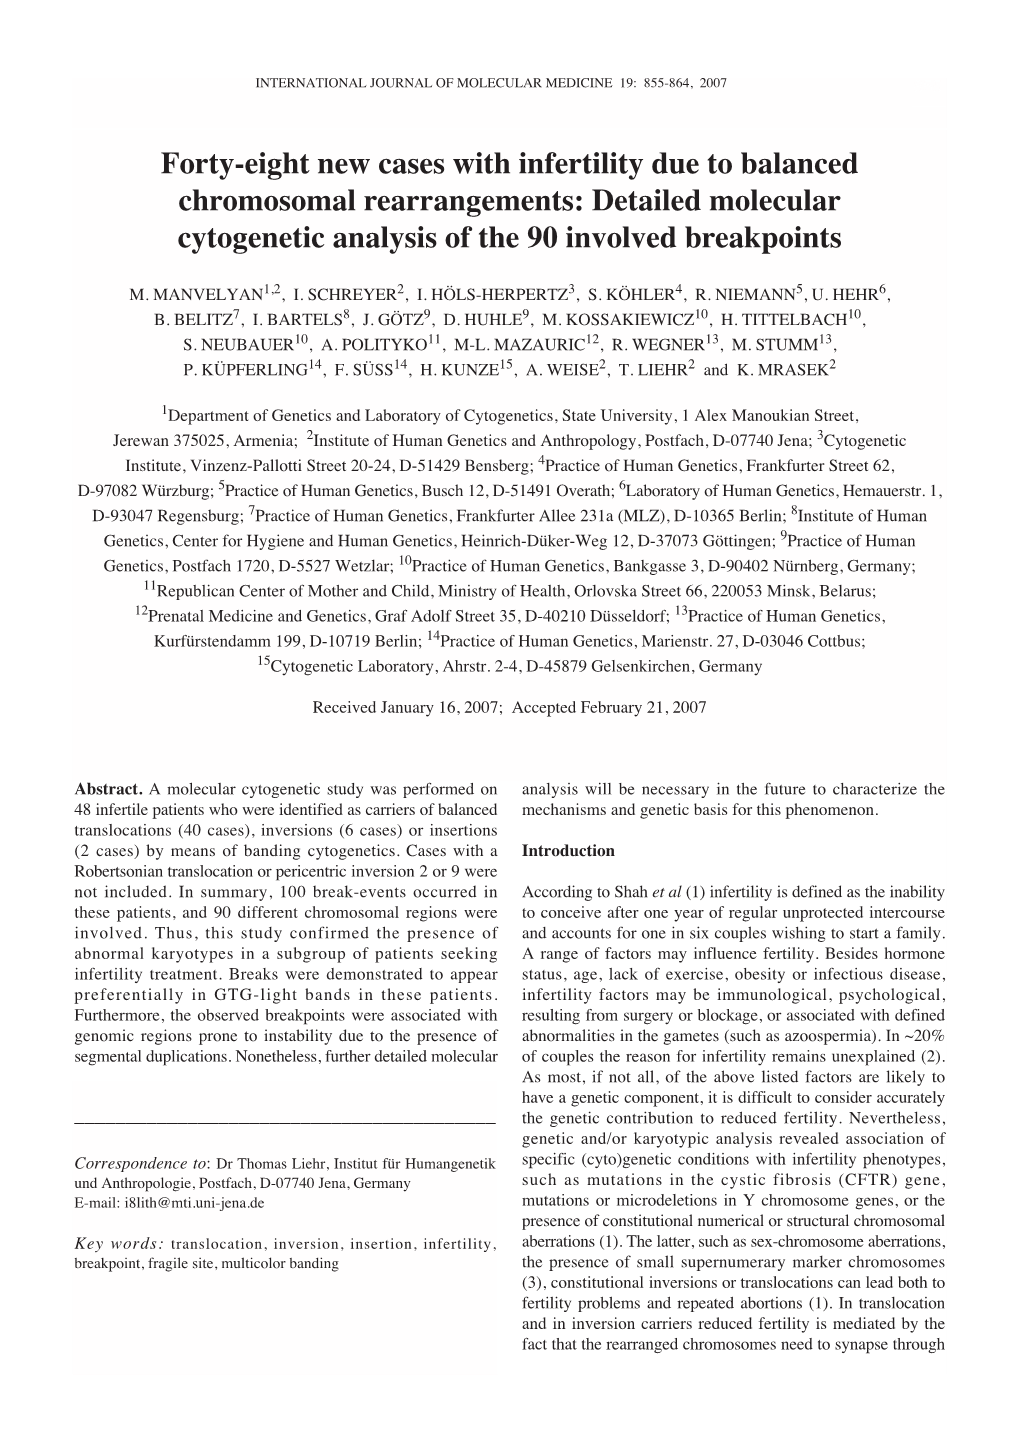 Forty-Eight New Cases with Infertility Due to Balanced Chromosomal Rearrangements: Detailed Molecular Cytogenetic Analysis of the 90 Involved Breakpoints